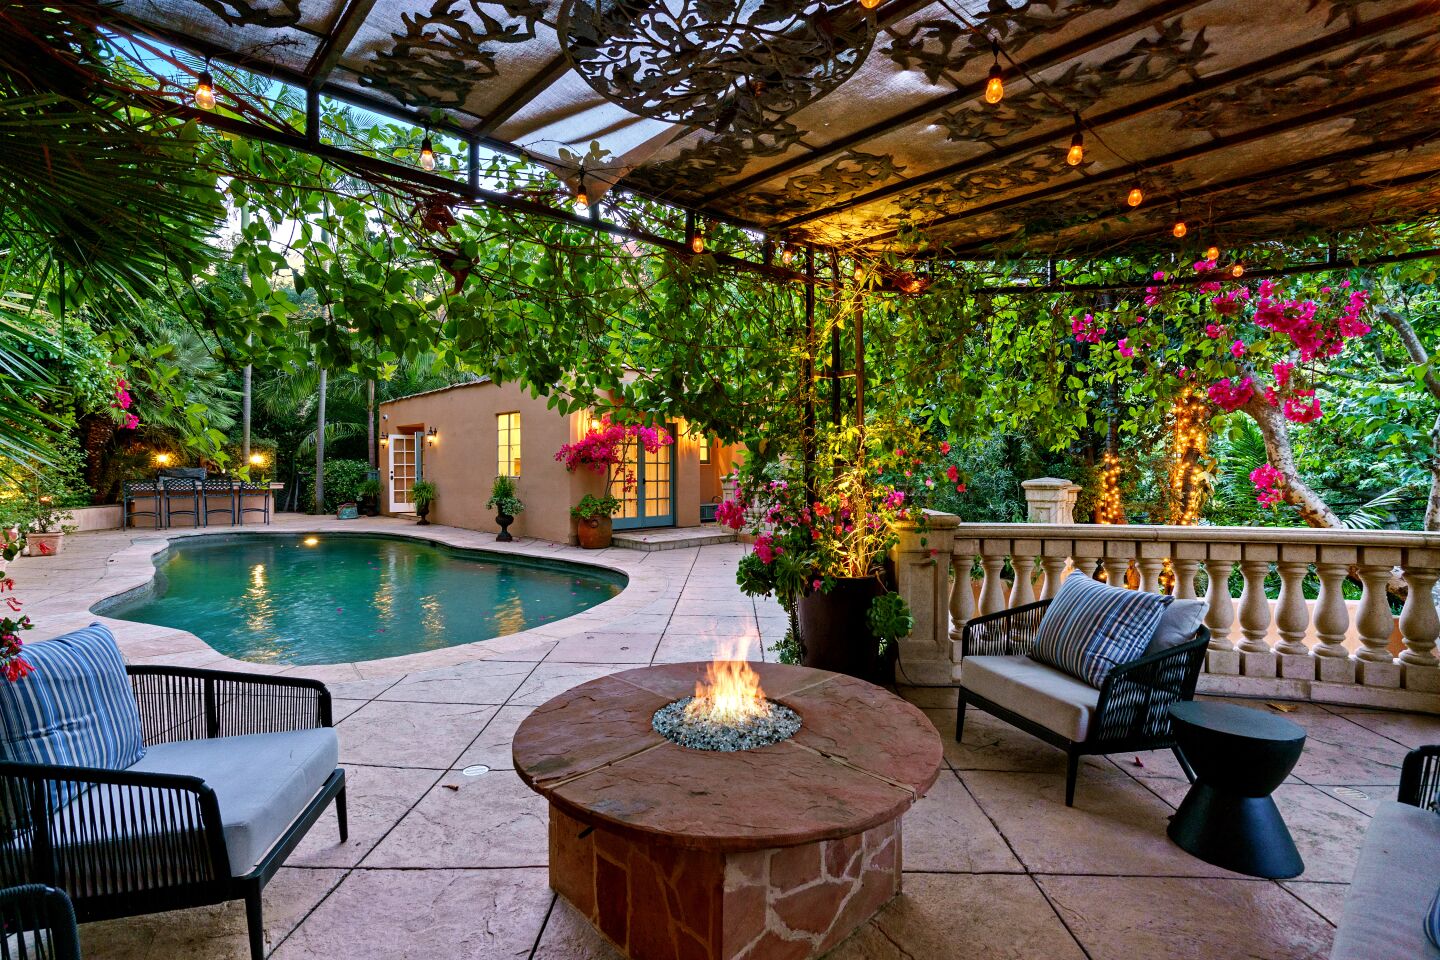 Courtyards, patios and a swimming pool with a separate pool house fill out the grounds.